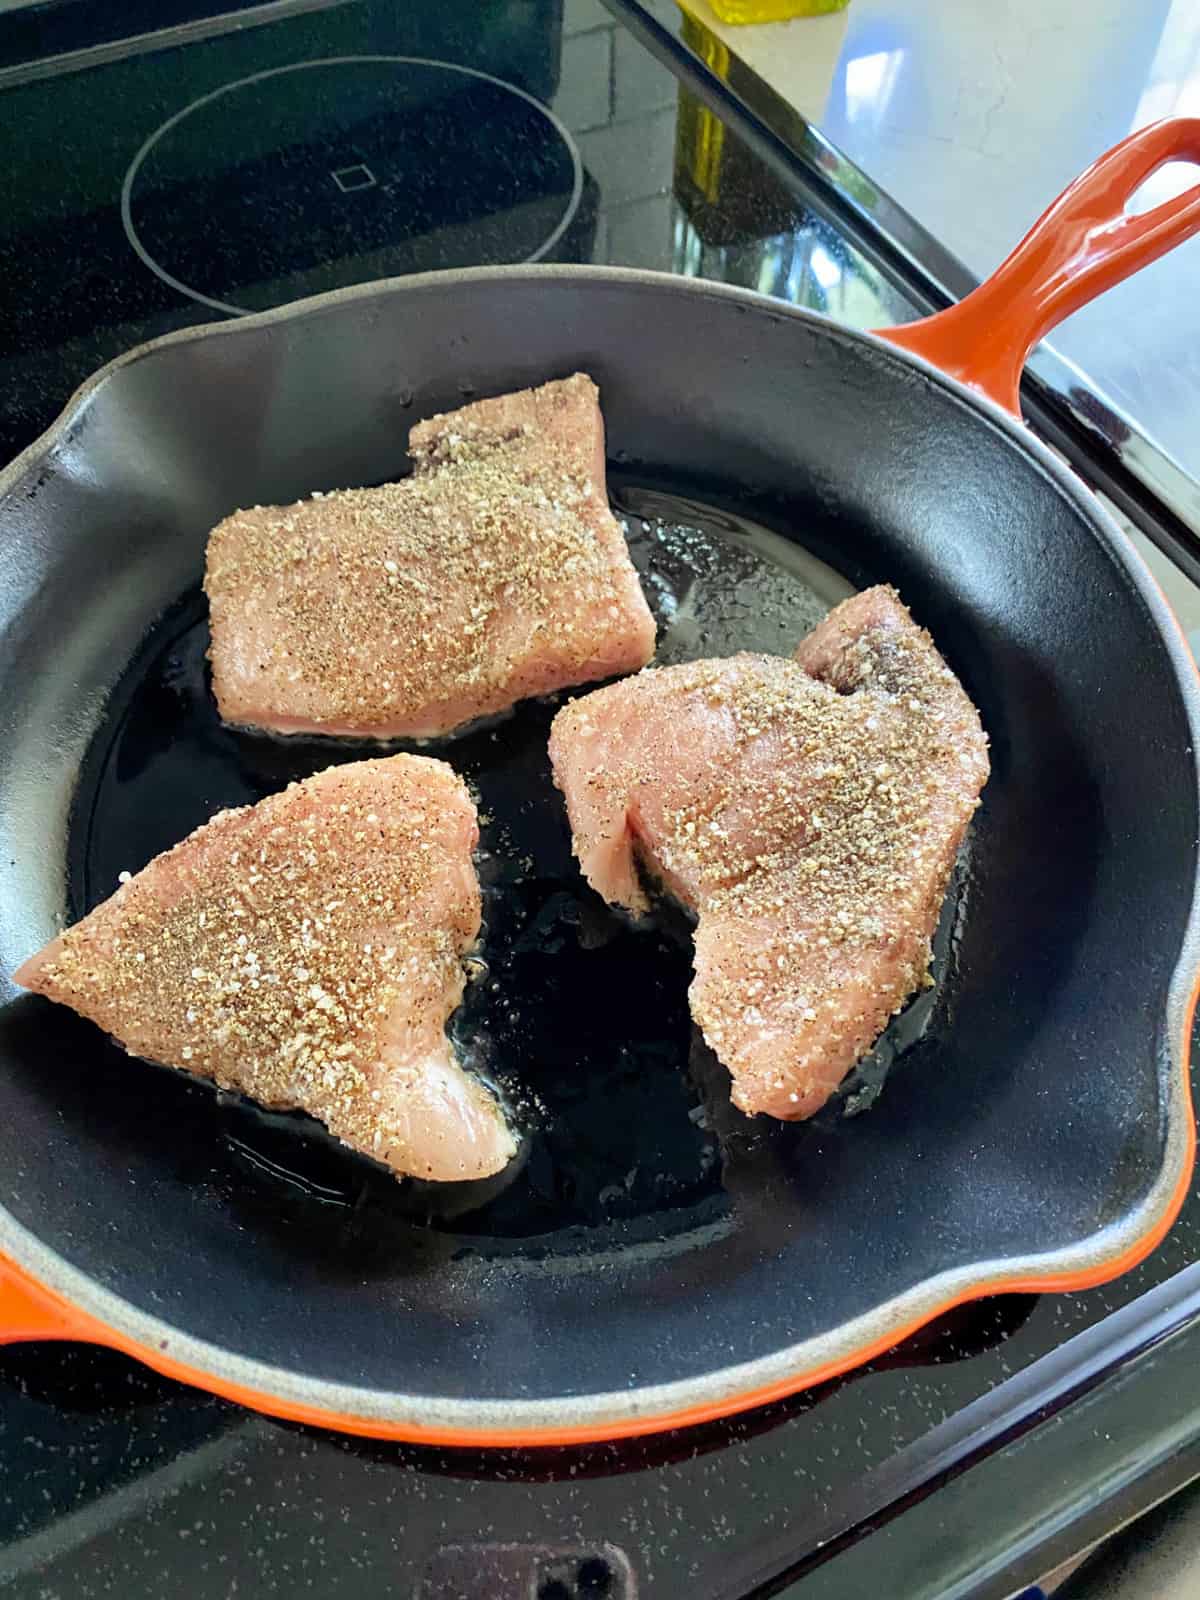 Orange cast iron skillet on a glass stove top with 3 seasoned Swordfish Steaks in the skillet.